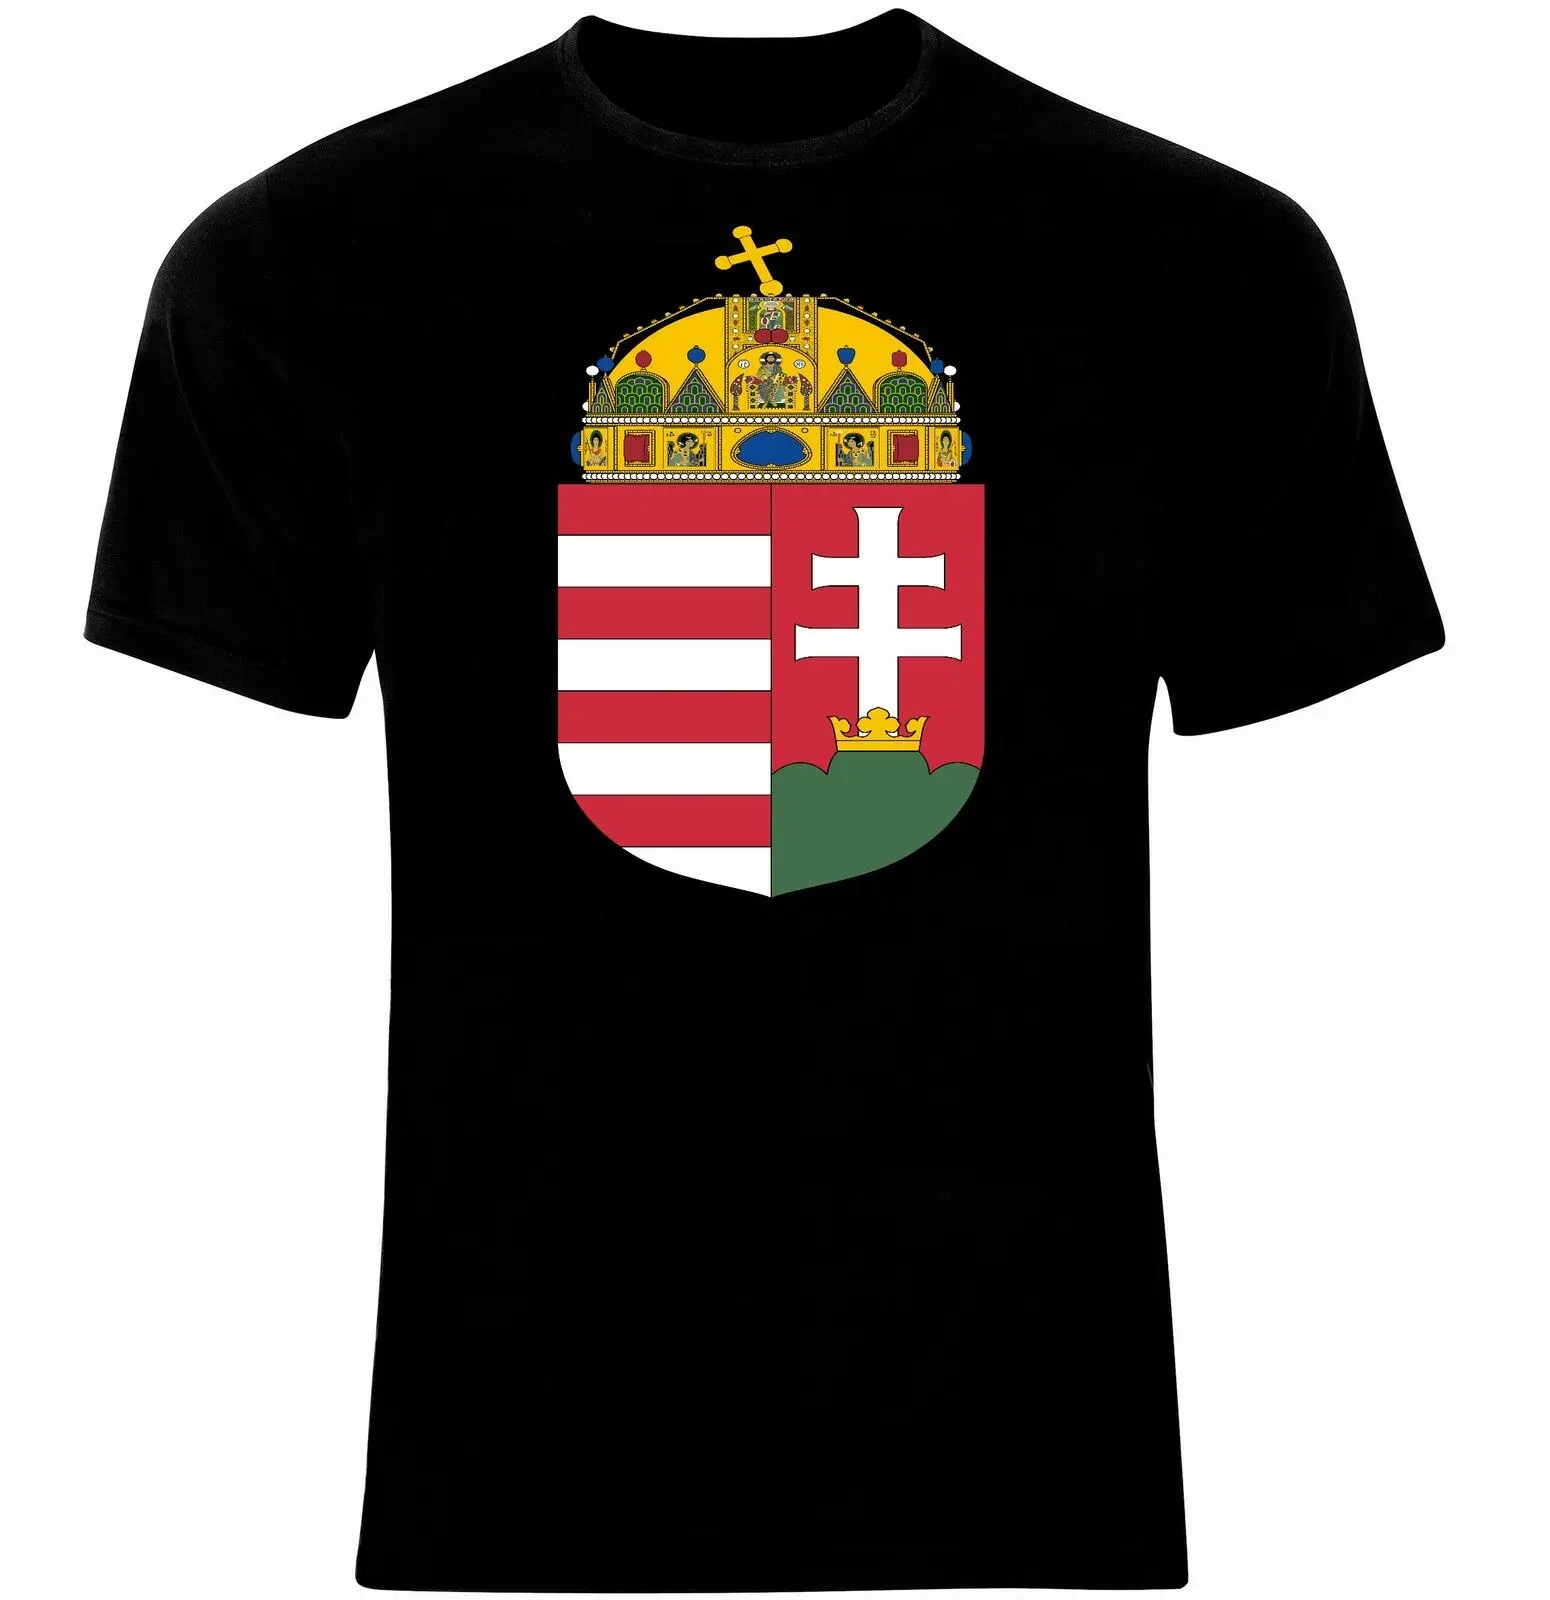 

Coat of Arms of The Hungary, Hungarian Arms Flag Mens T-Shirt. Summer Cotton Short Sleeve O-Neck Unisex T Shirt New S-3XL